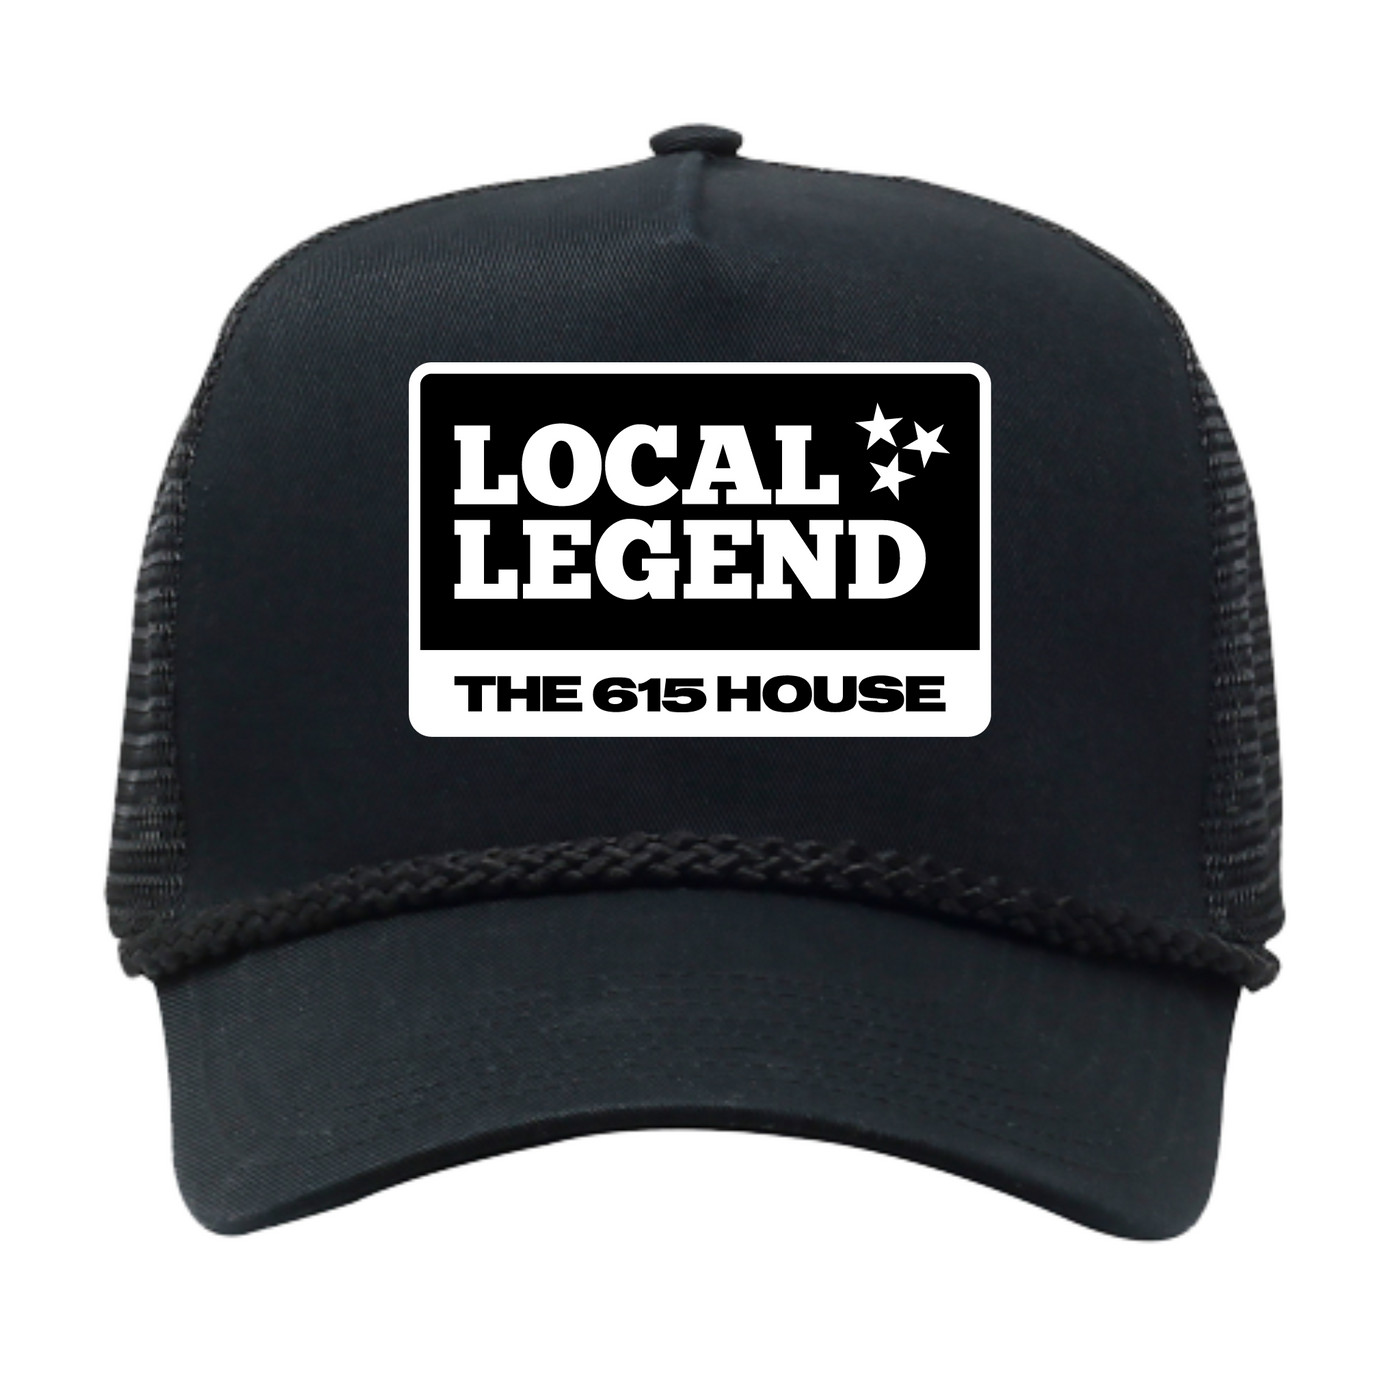 THE 615 HOUSE - Local Legend Embroidery Patch Corded Hat: Black